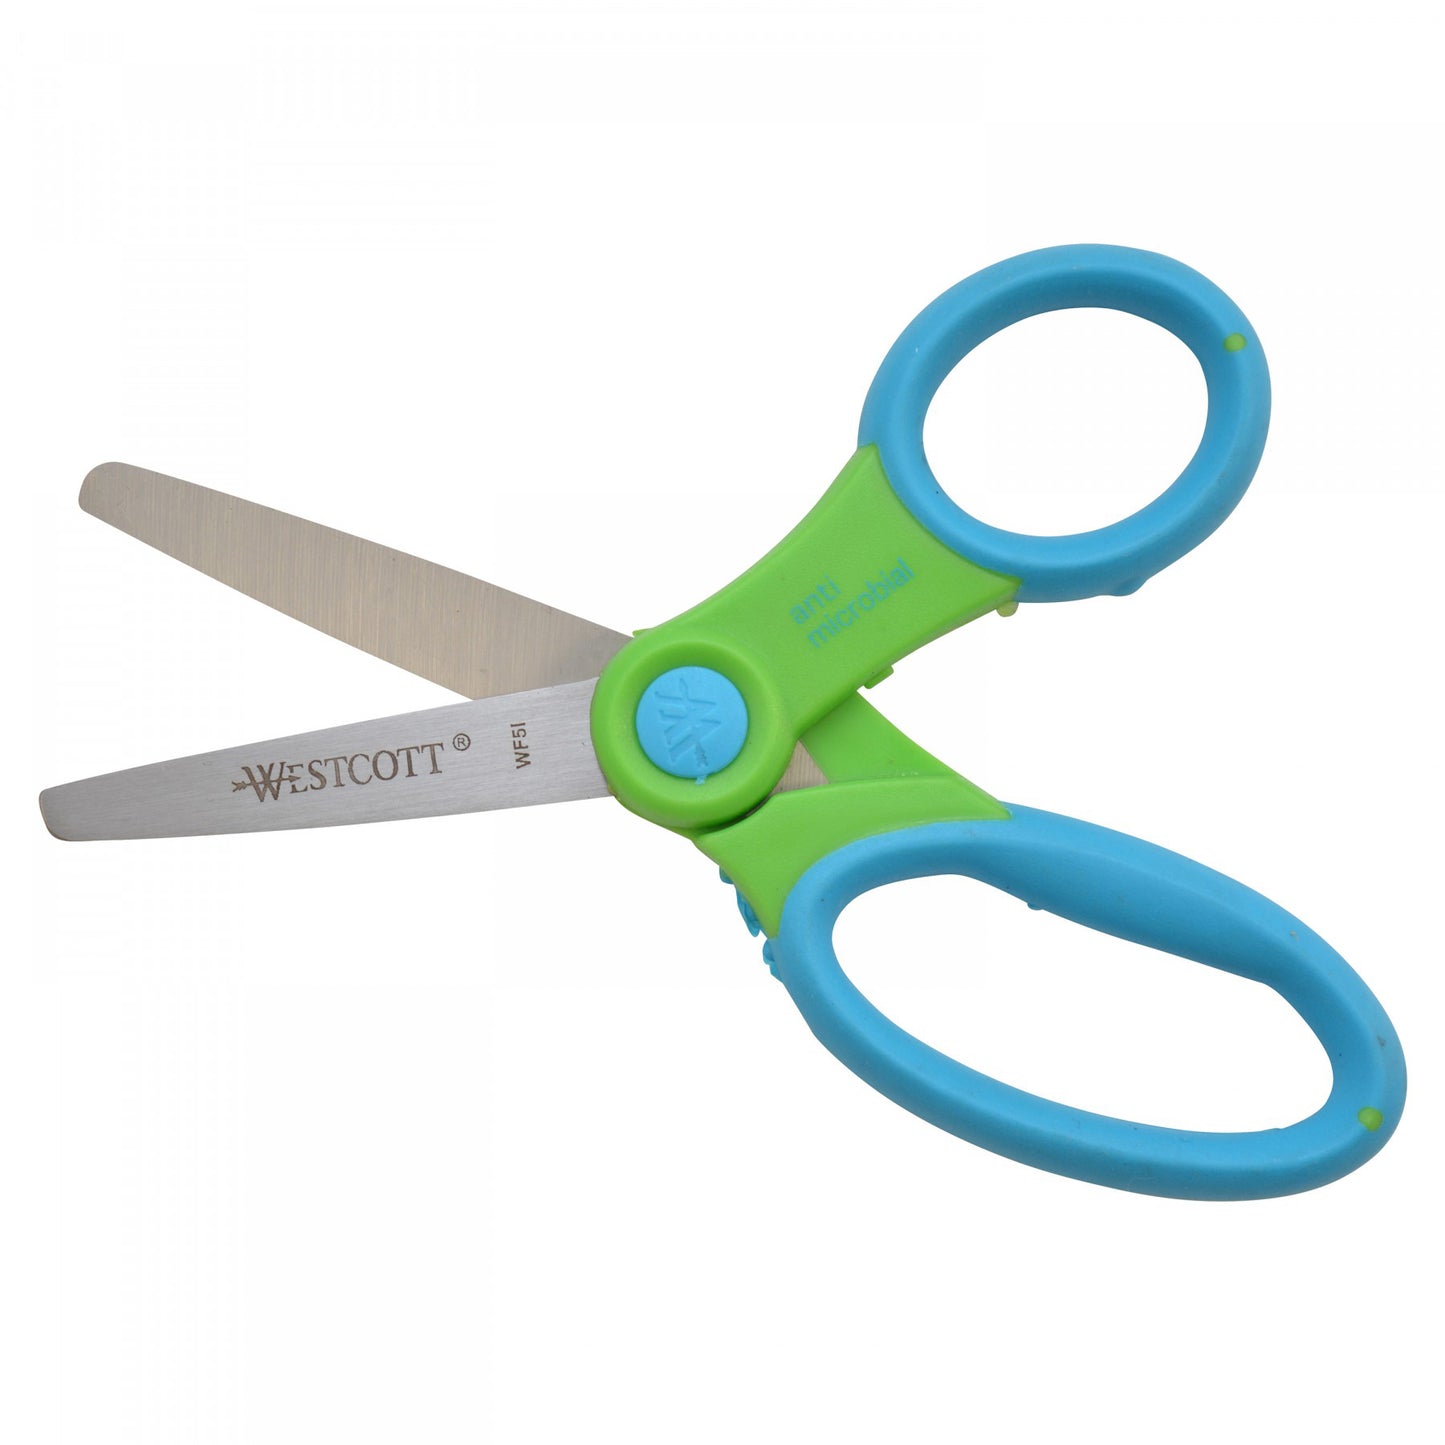 5" Anti-Microbial Kids Scissors, Blunt, Assorted Colors (No Color Choice), Pack of 6